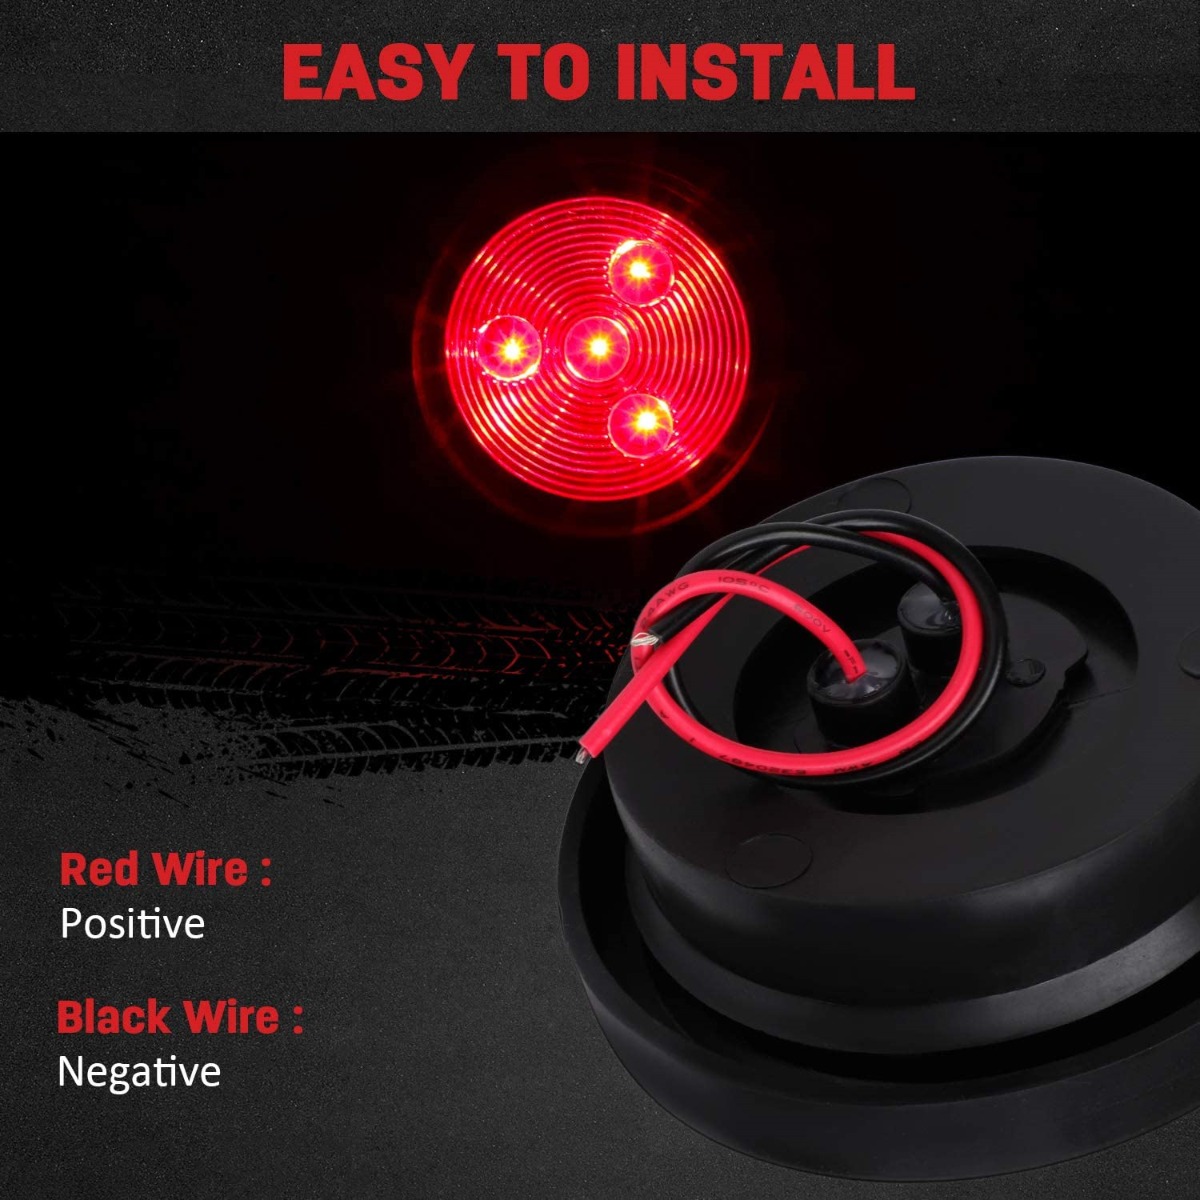 5PCS 2.5鈥?Red Round Side Marker Light Tail Lamps 4LED With Rubber Grommet for Truck Trailer Pickup